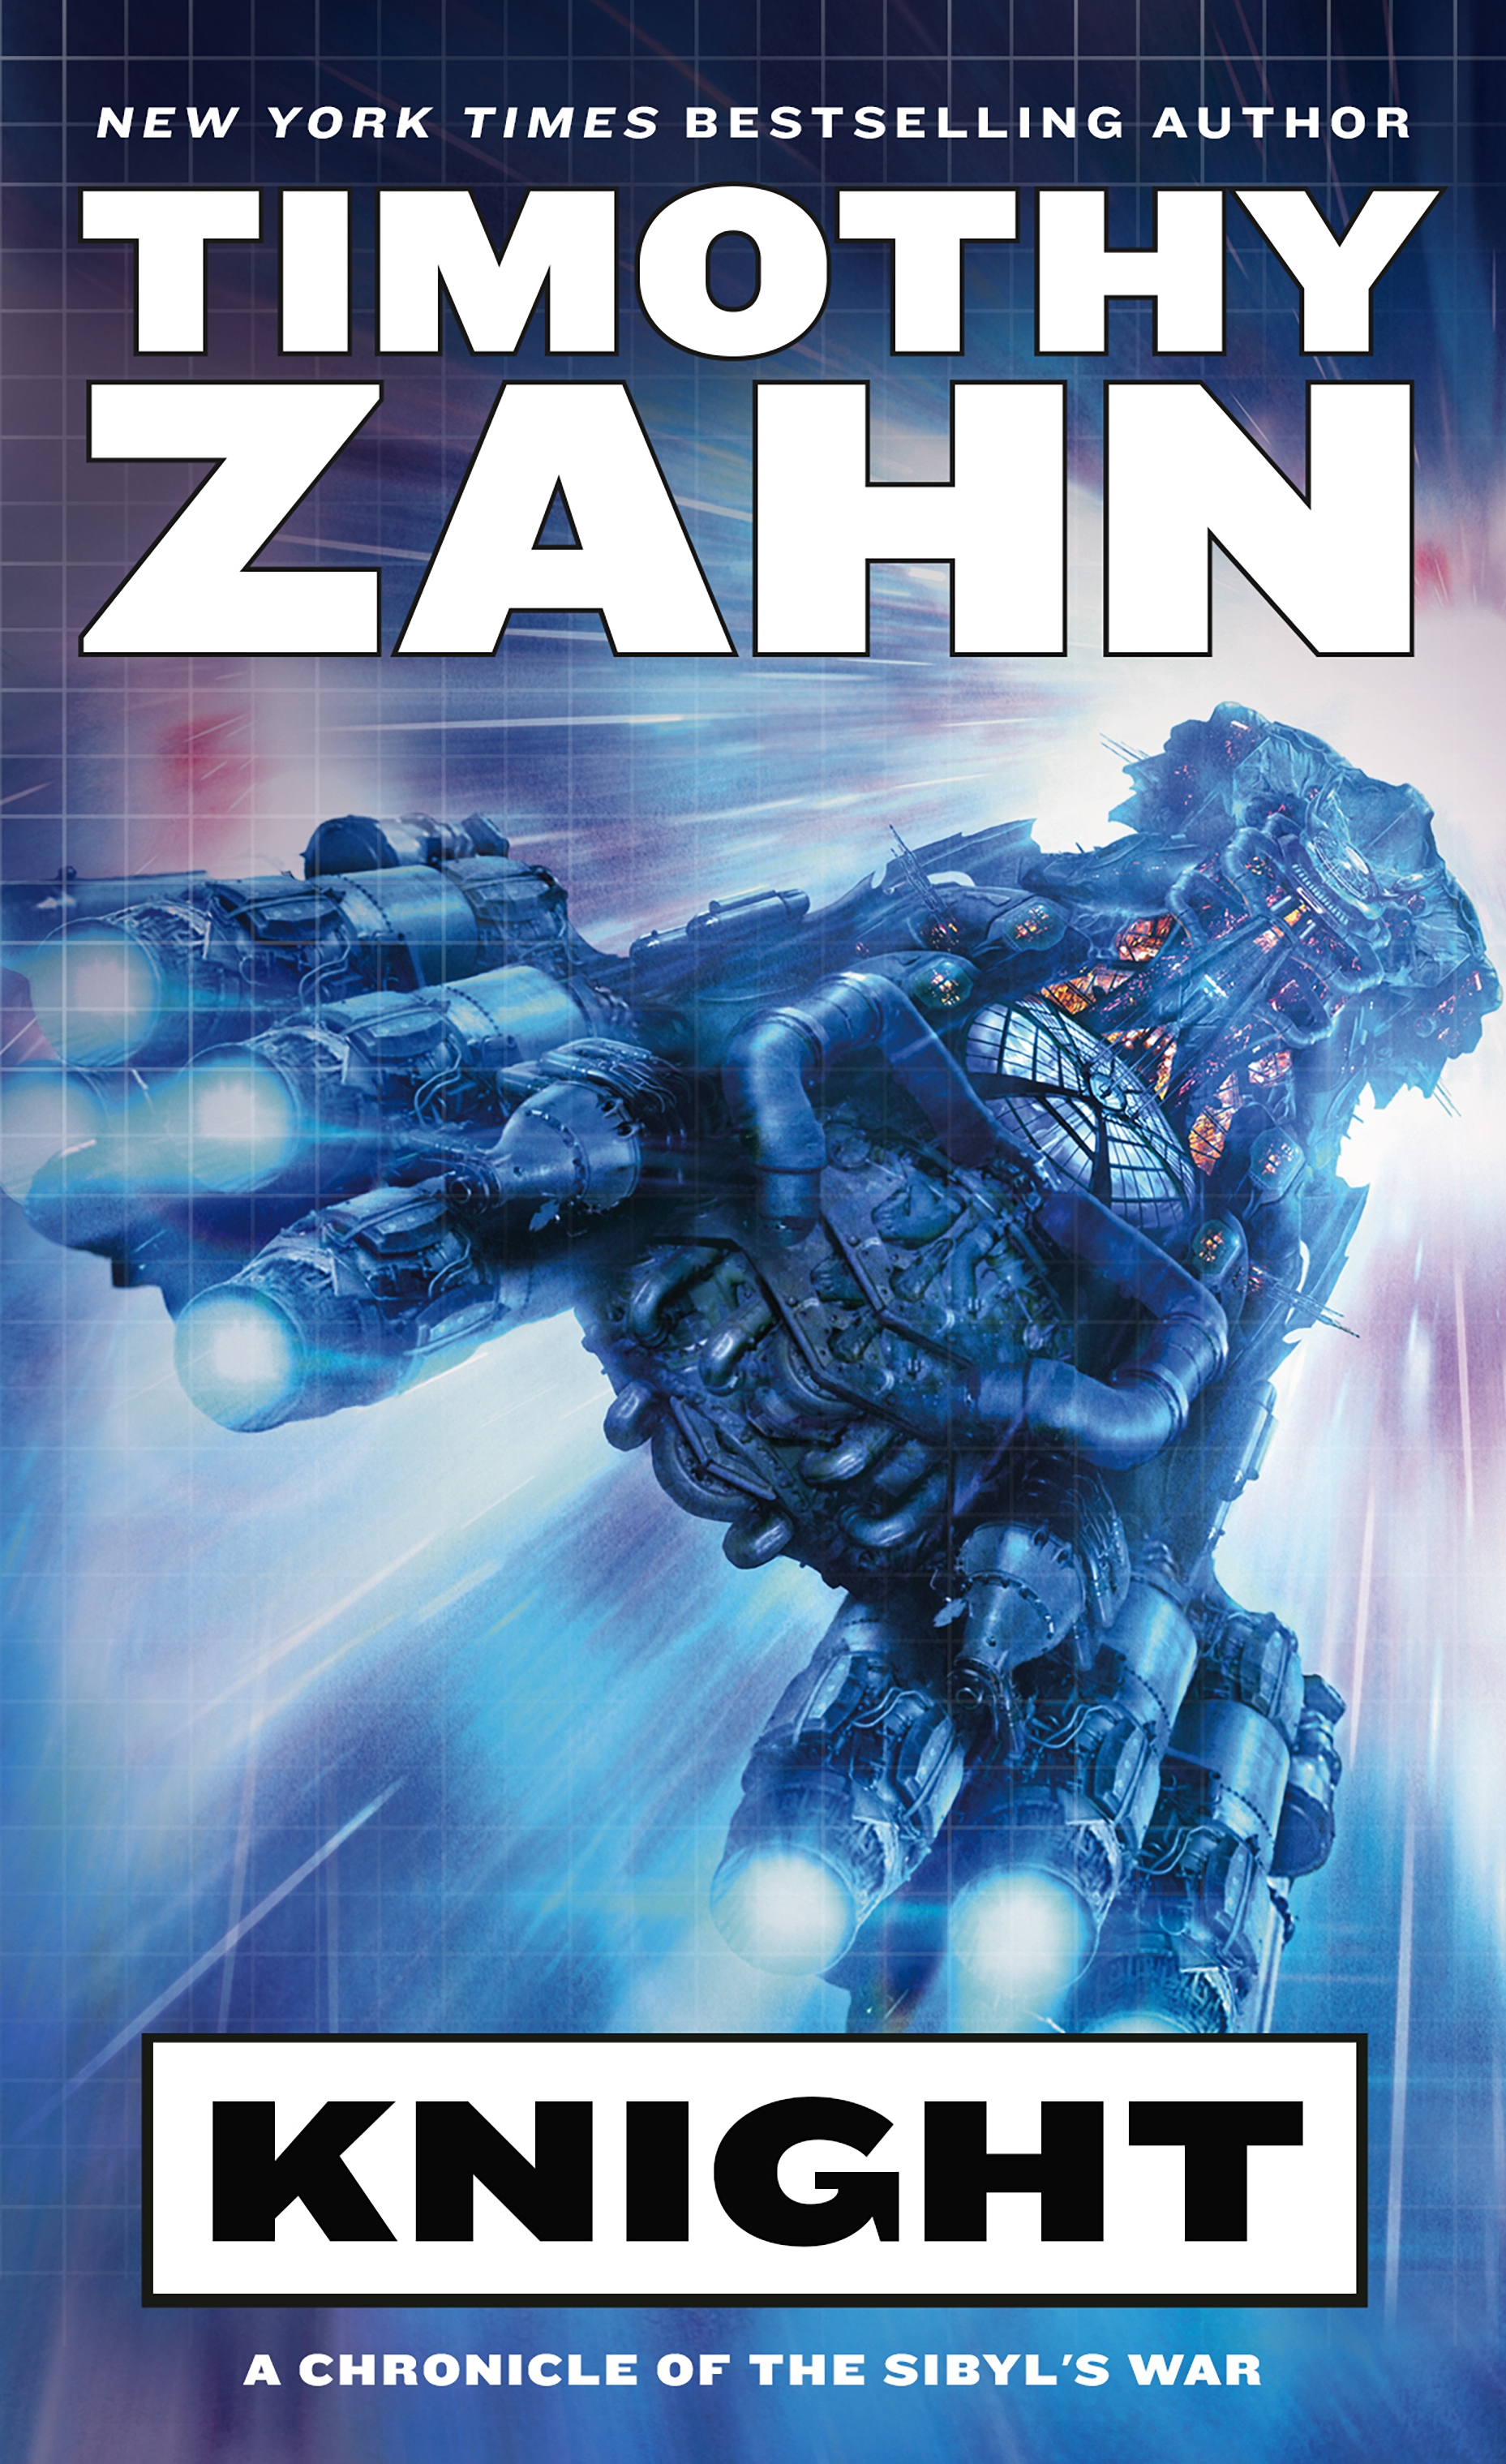 Knight : A Chronicle of the Sibyl's War by Timothy Zahn